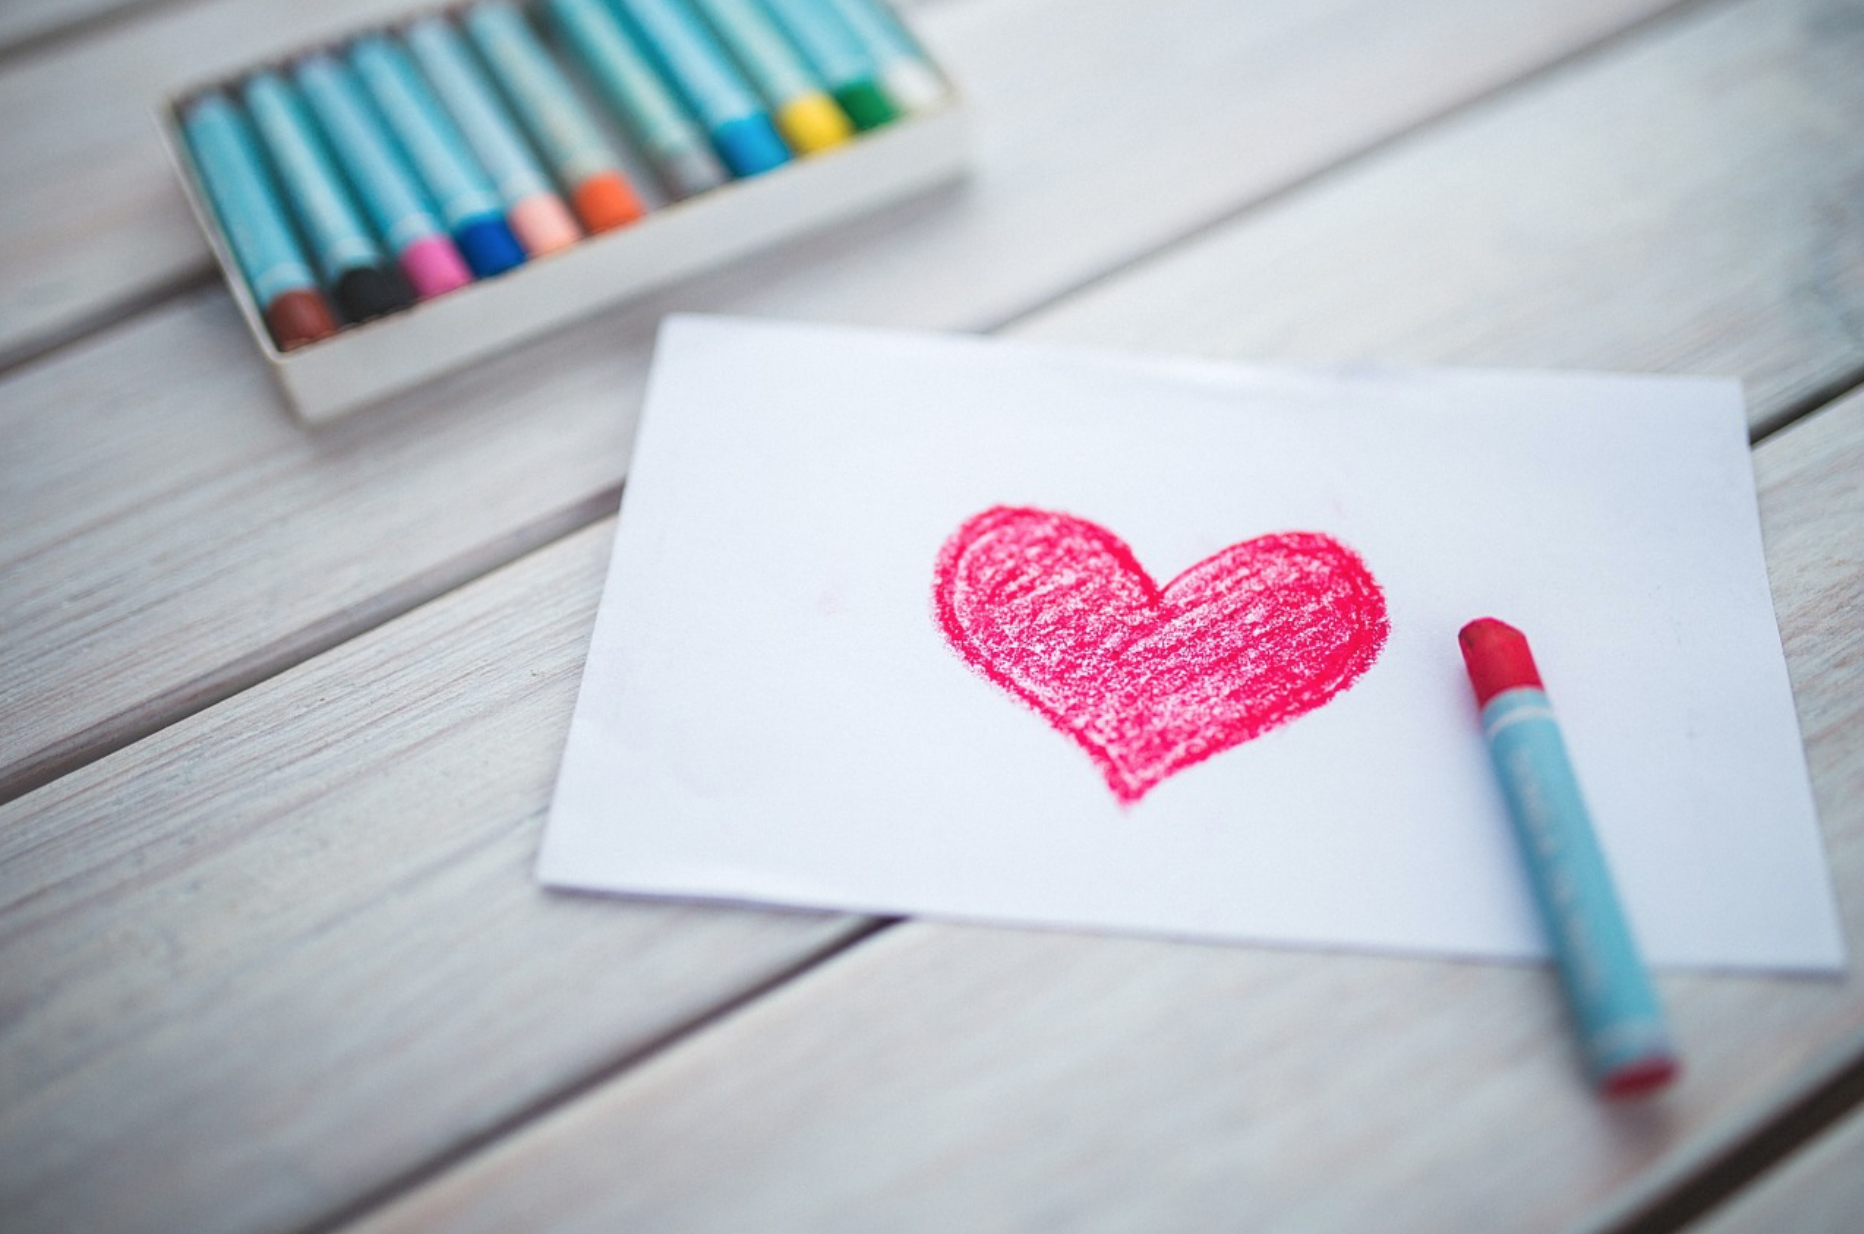 A crayon drawing of a heart